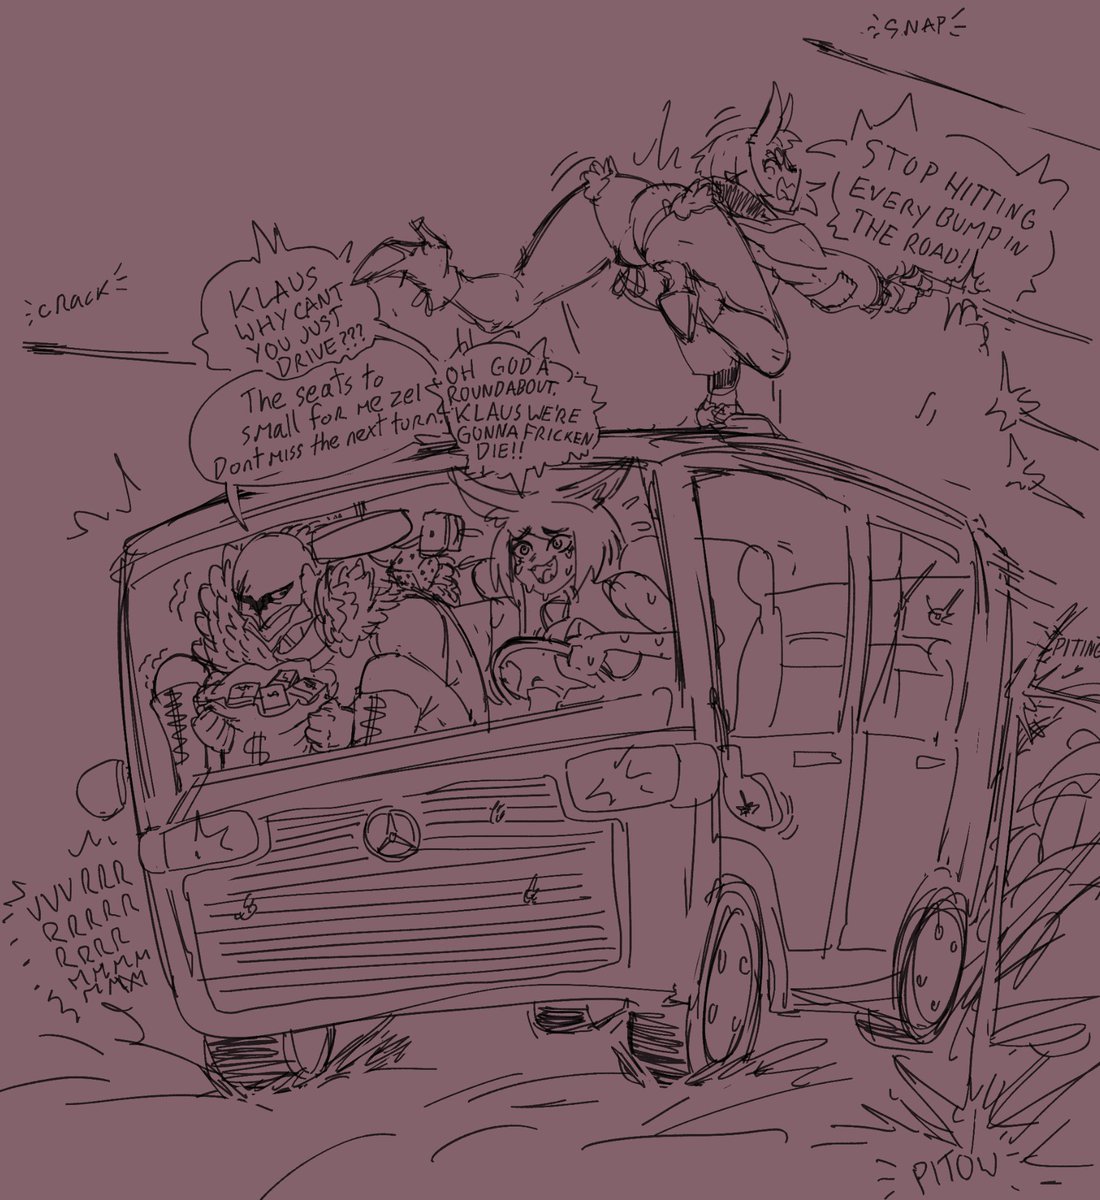 Was told to post this by a fren, dumb sketch of these 3 idiots making a get away in a shitty little van thing